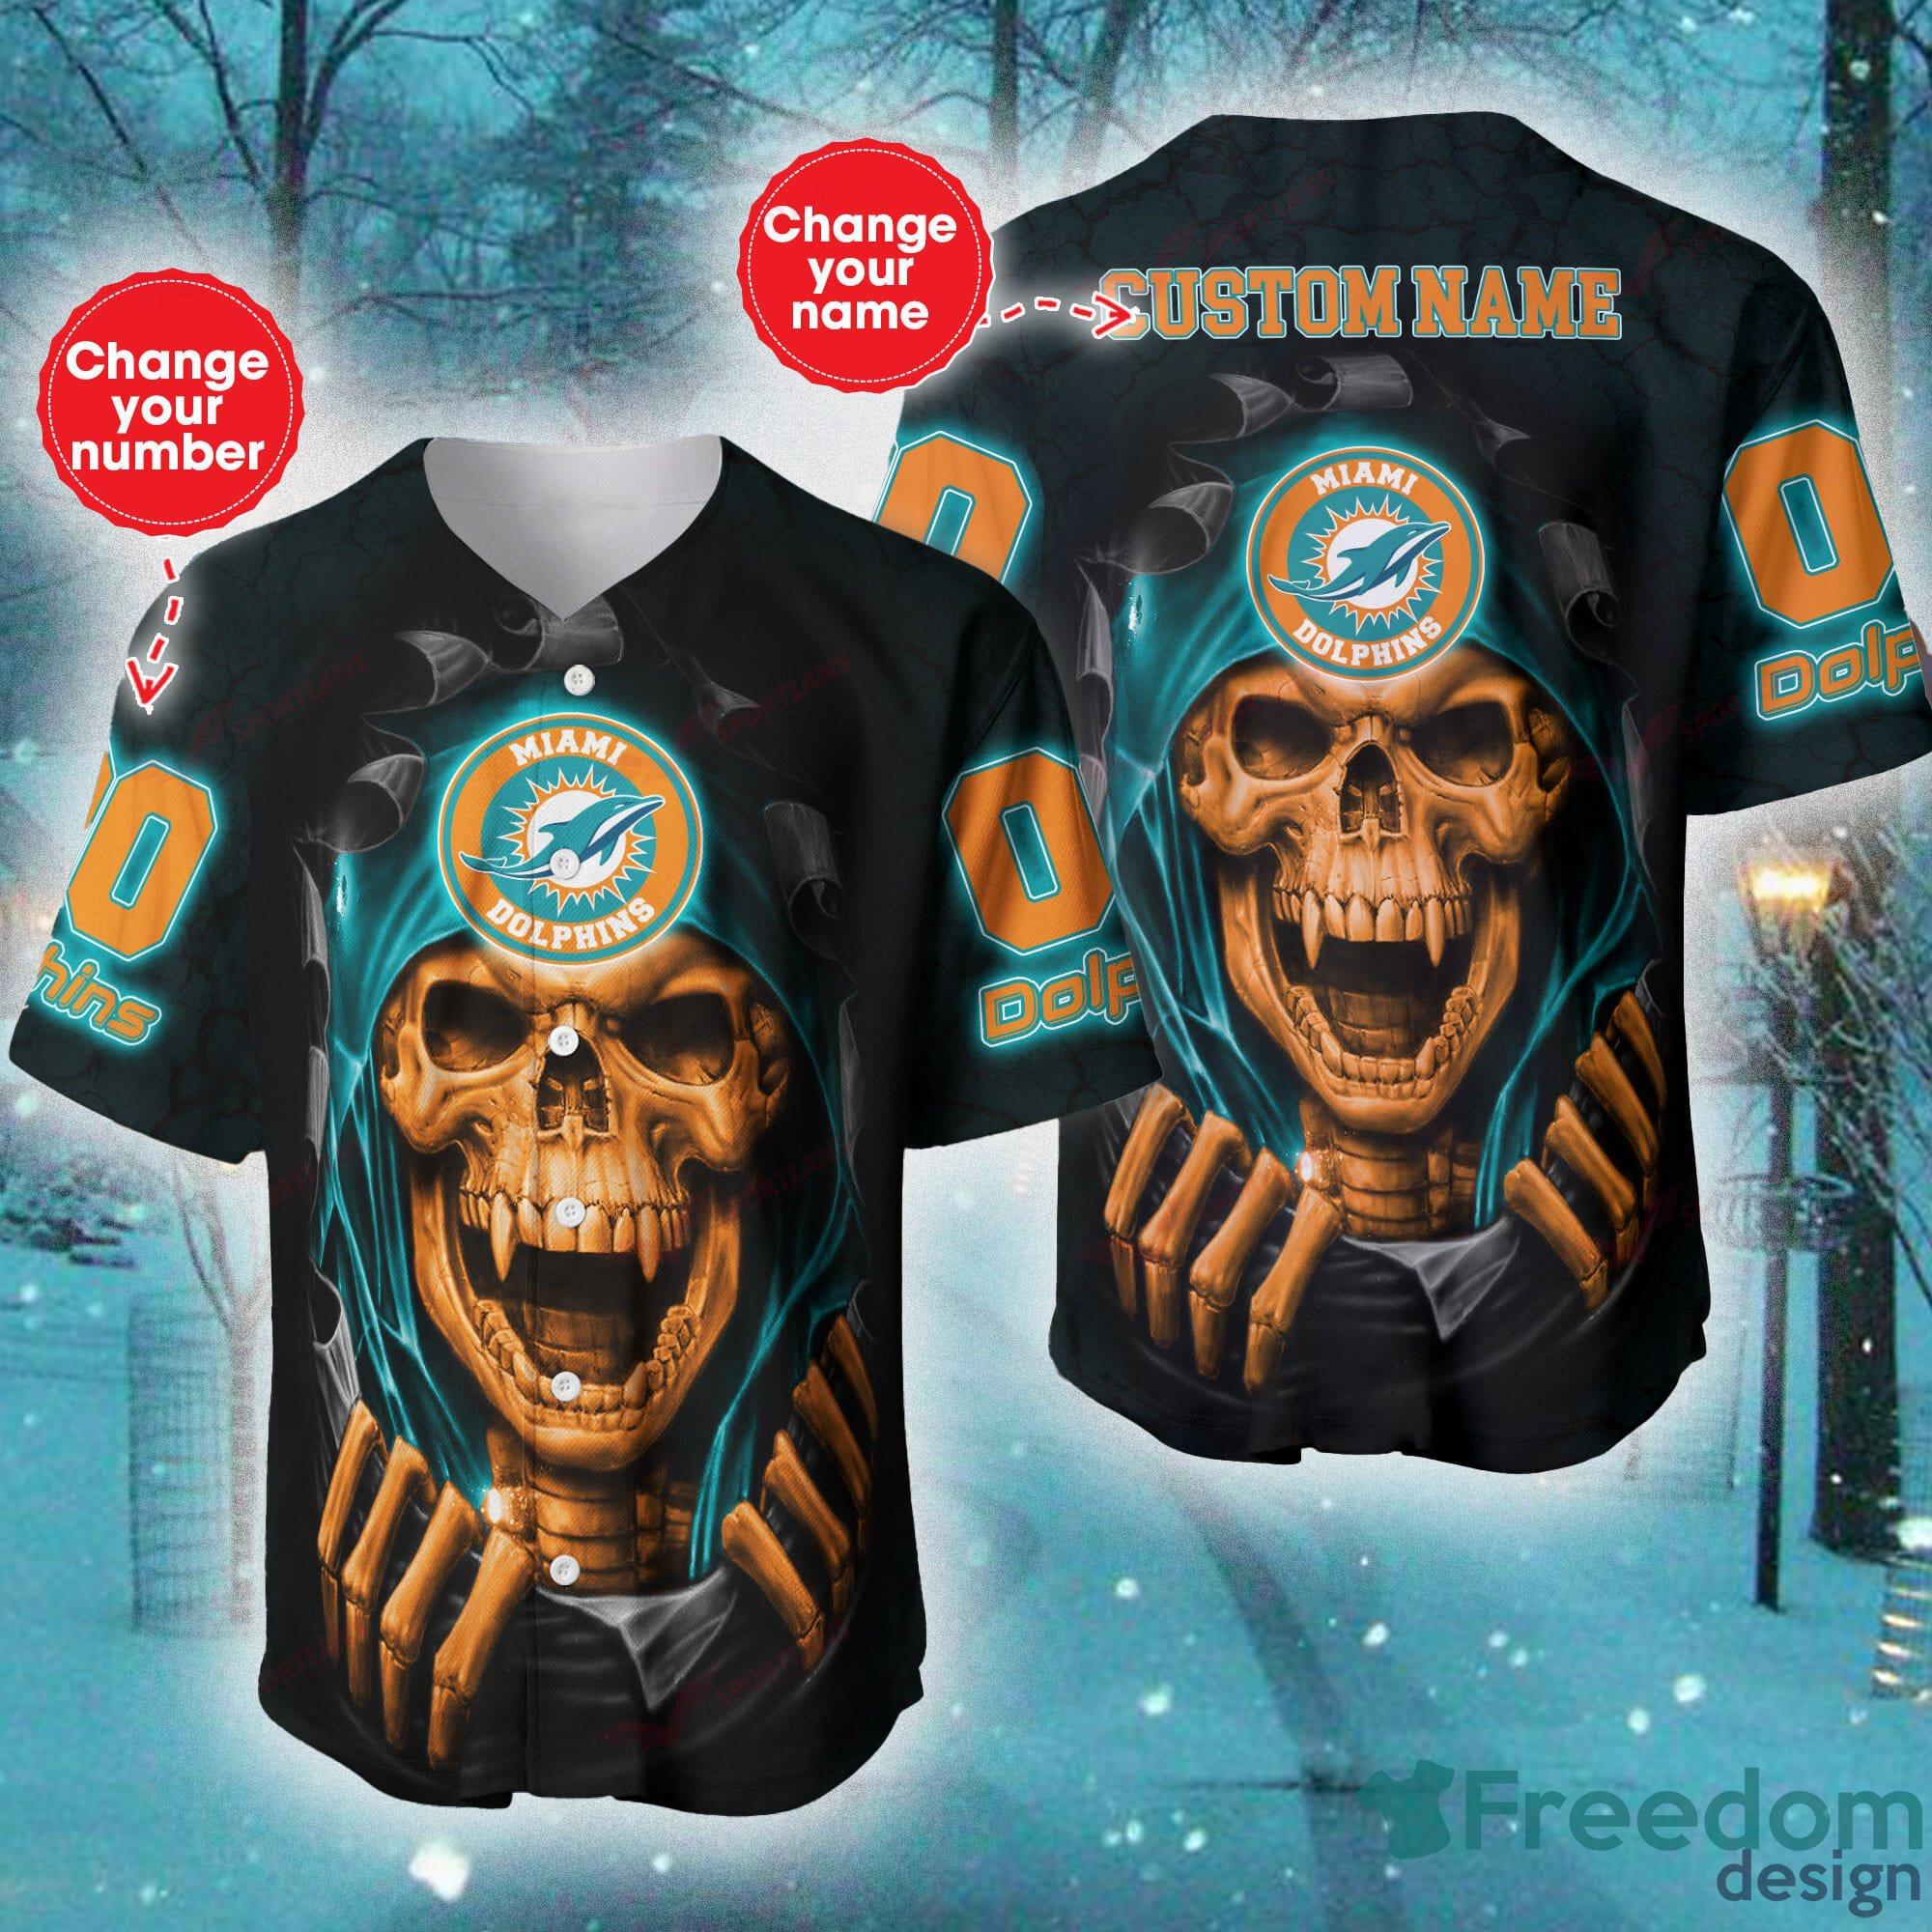 Miami Dolphins NFL Baseball Jersey Shirt Skull Custom Number And